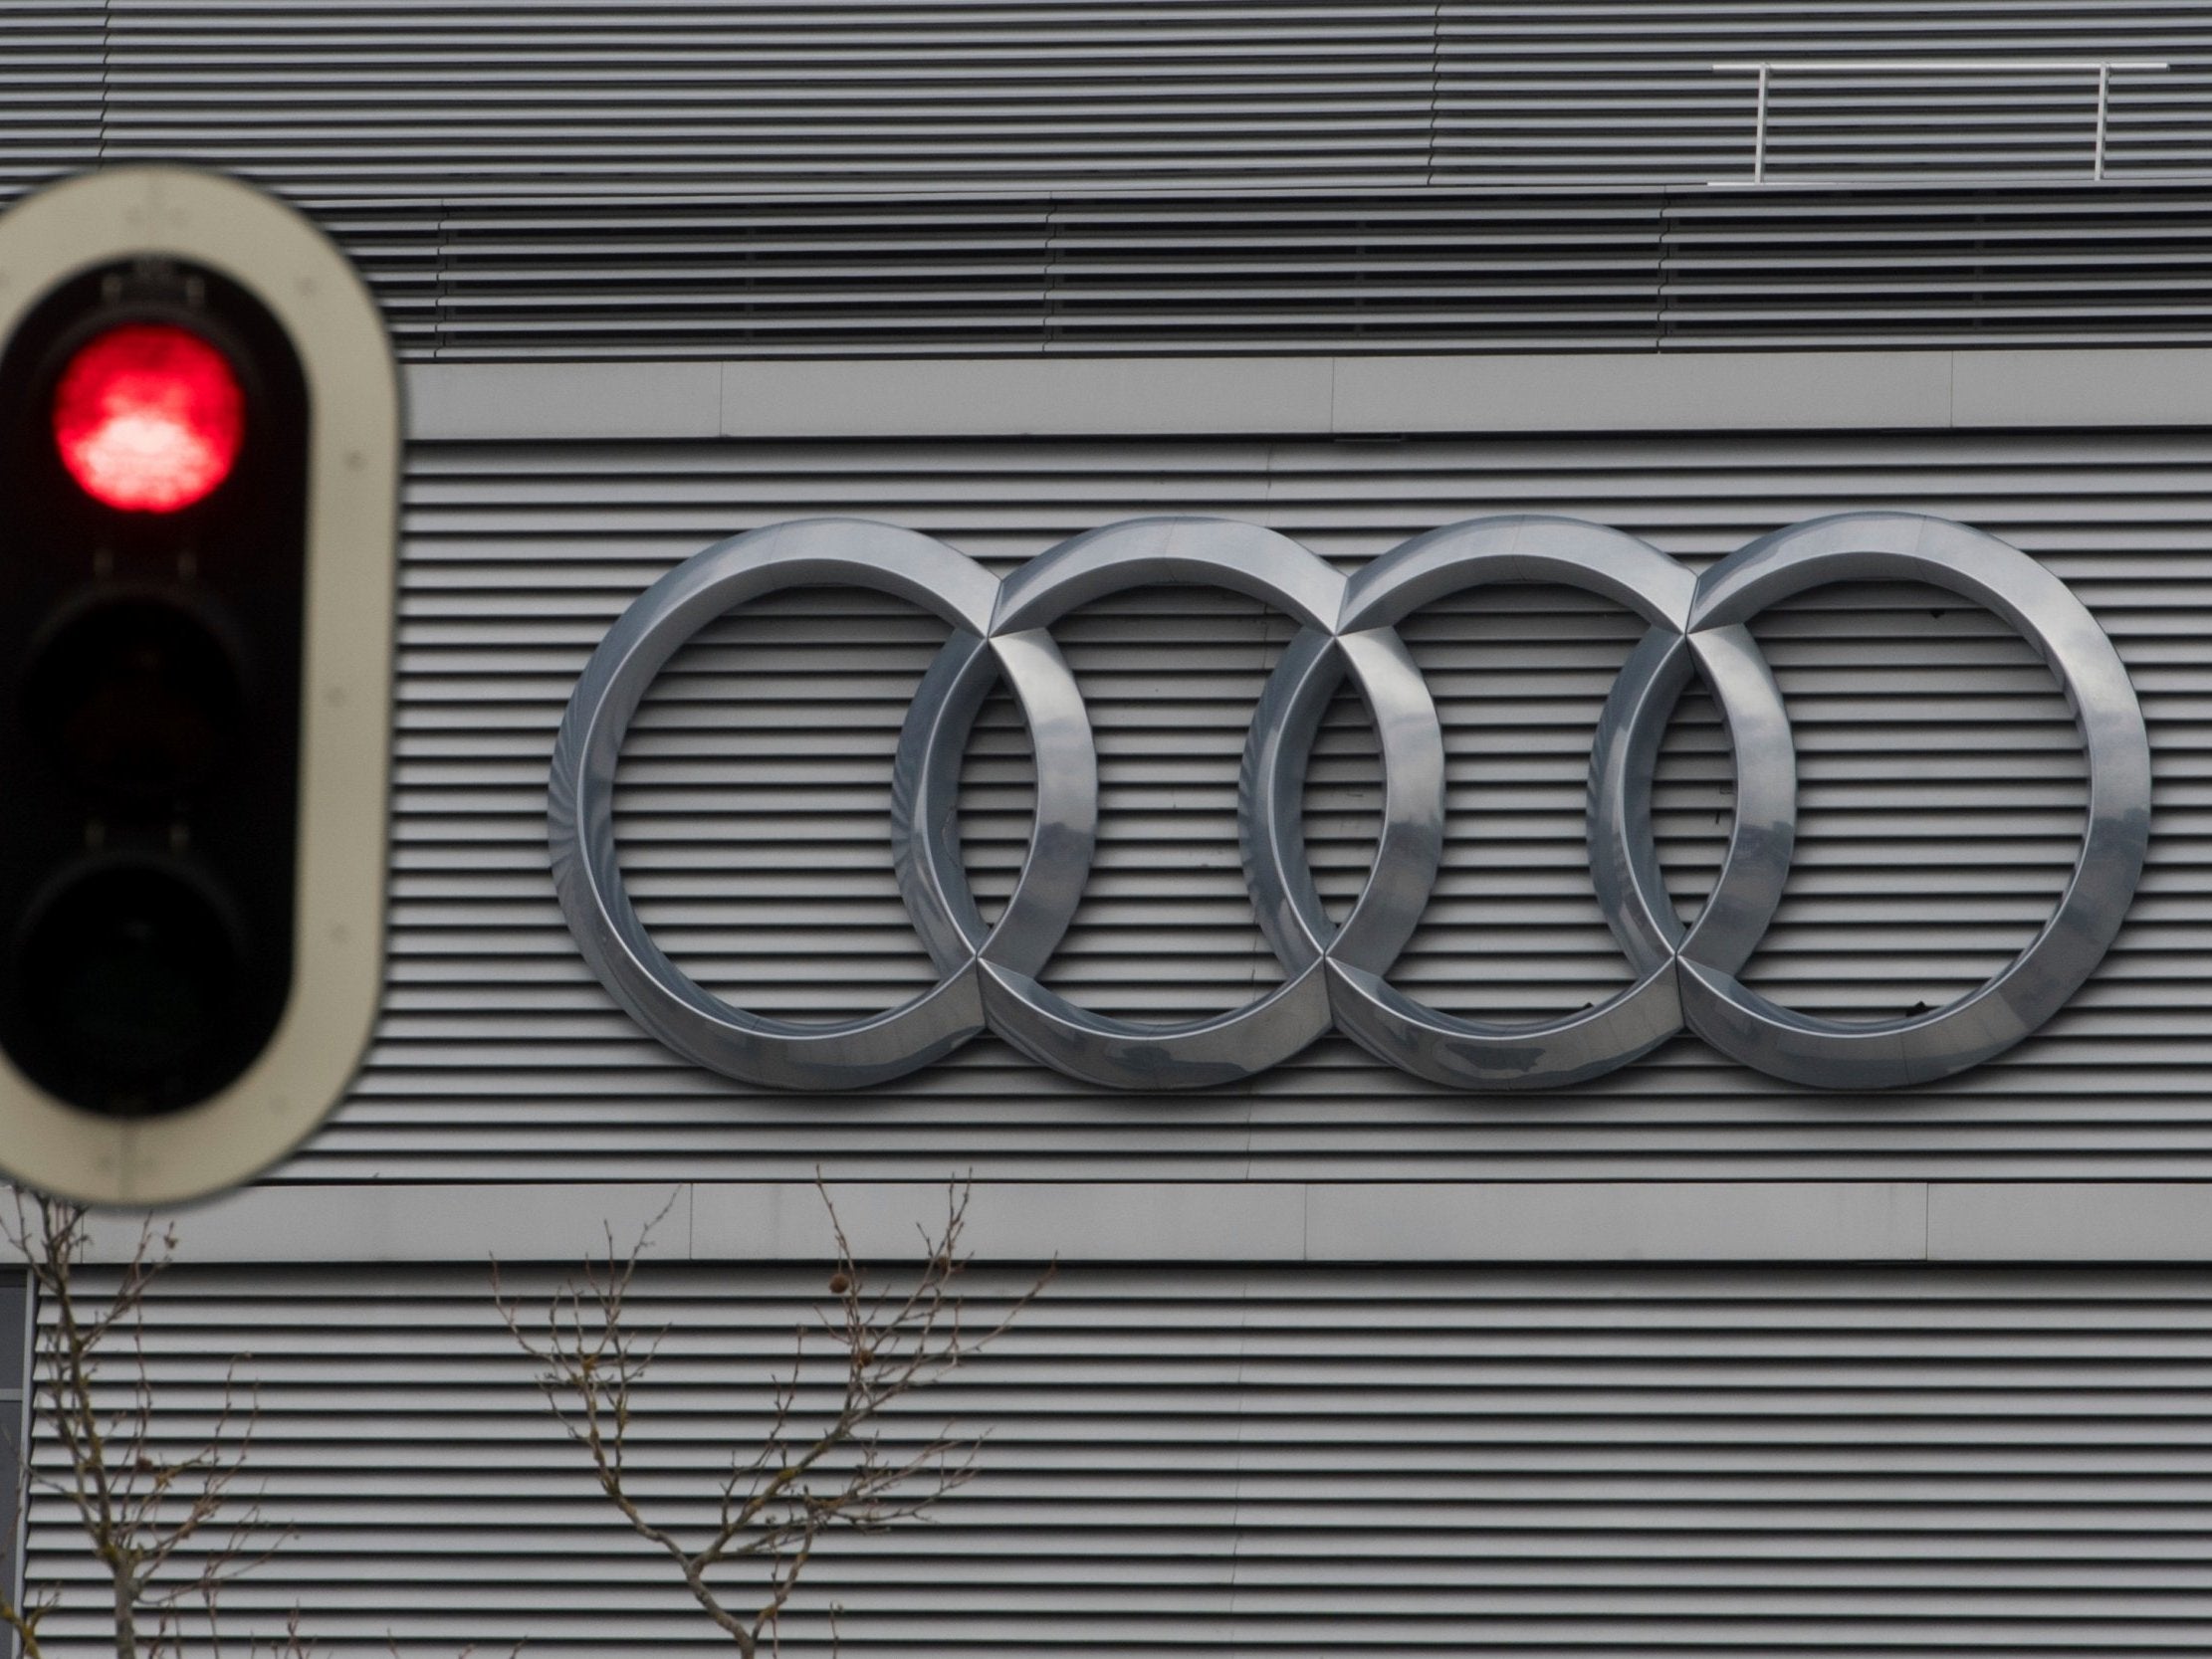 Audi previously halted deliveries of some models after irregularities in emissions systems were revealed